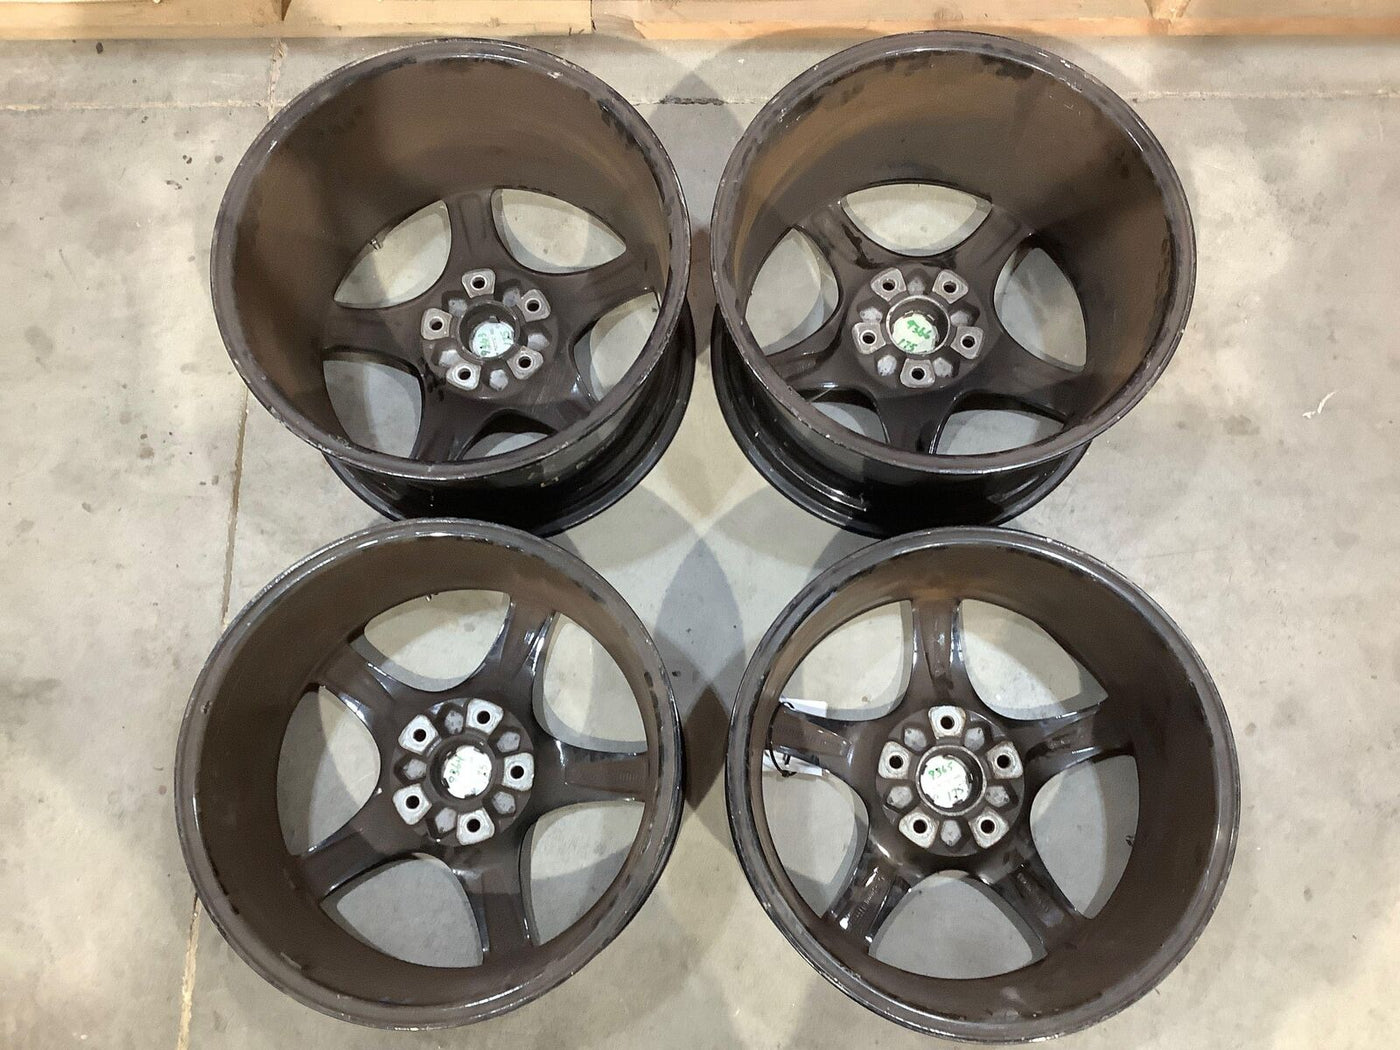 05-13 Porsche 911 997 Carrera Set of 4 Staggered Wheels 19x8 19x11 Repaired